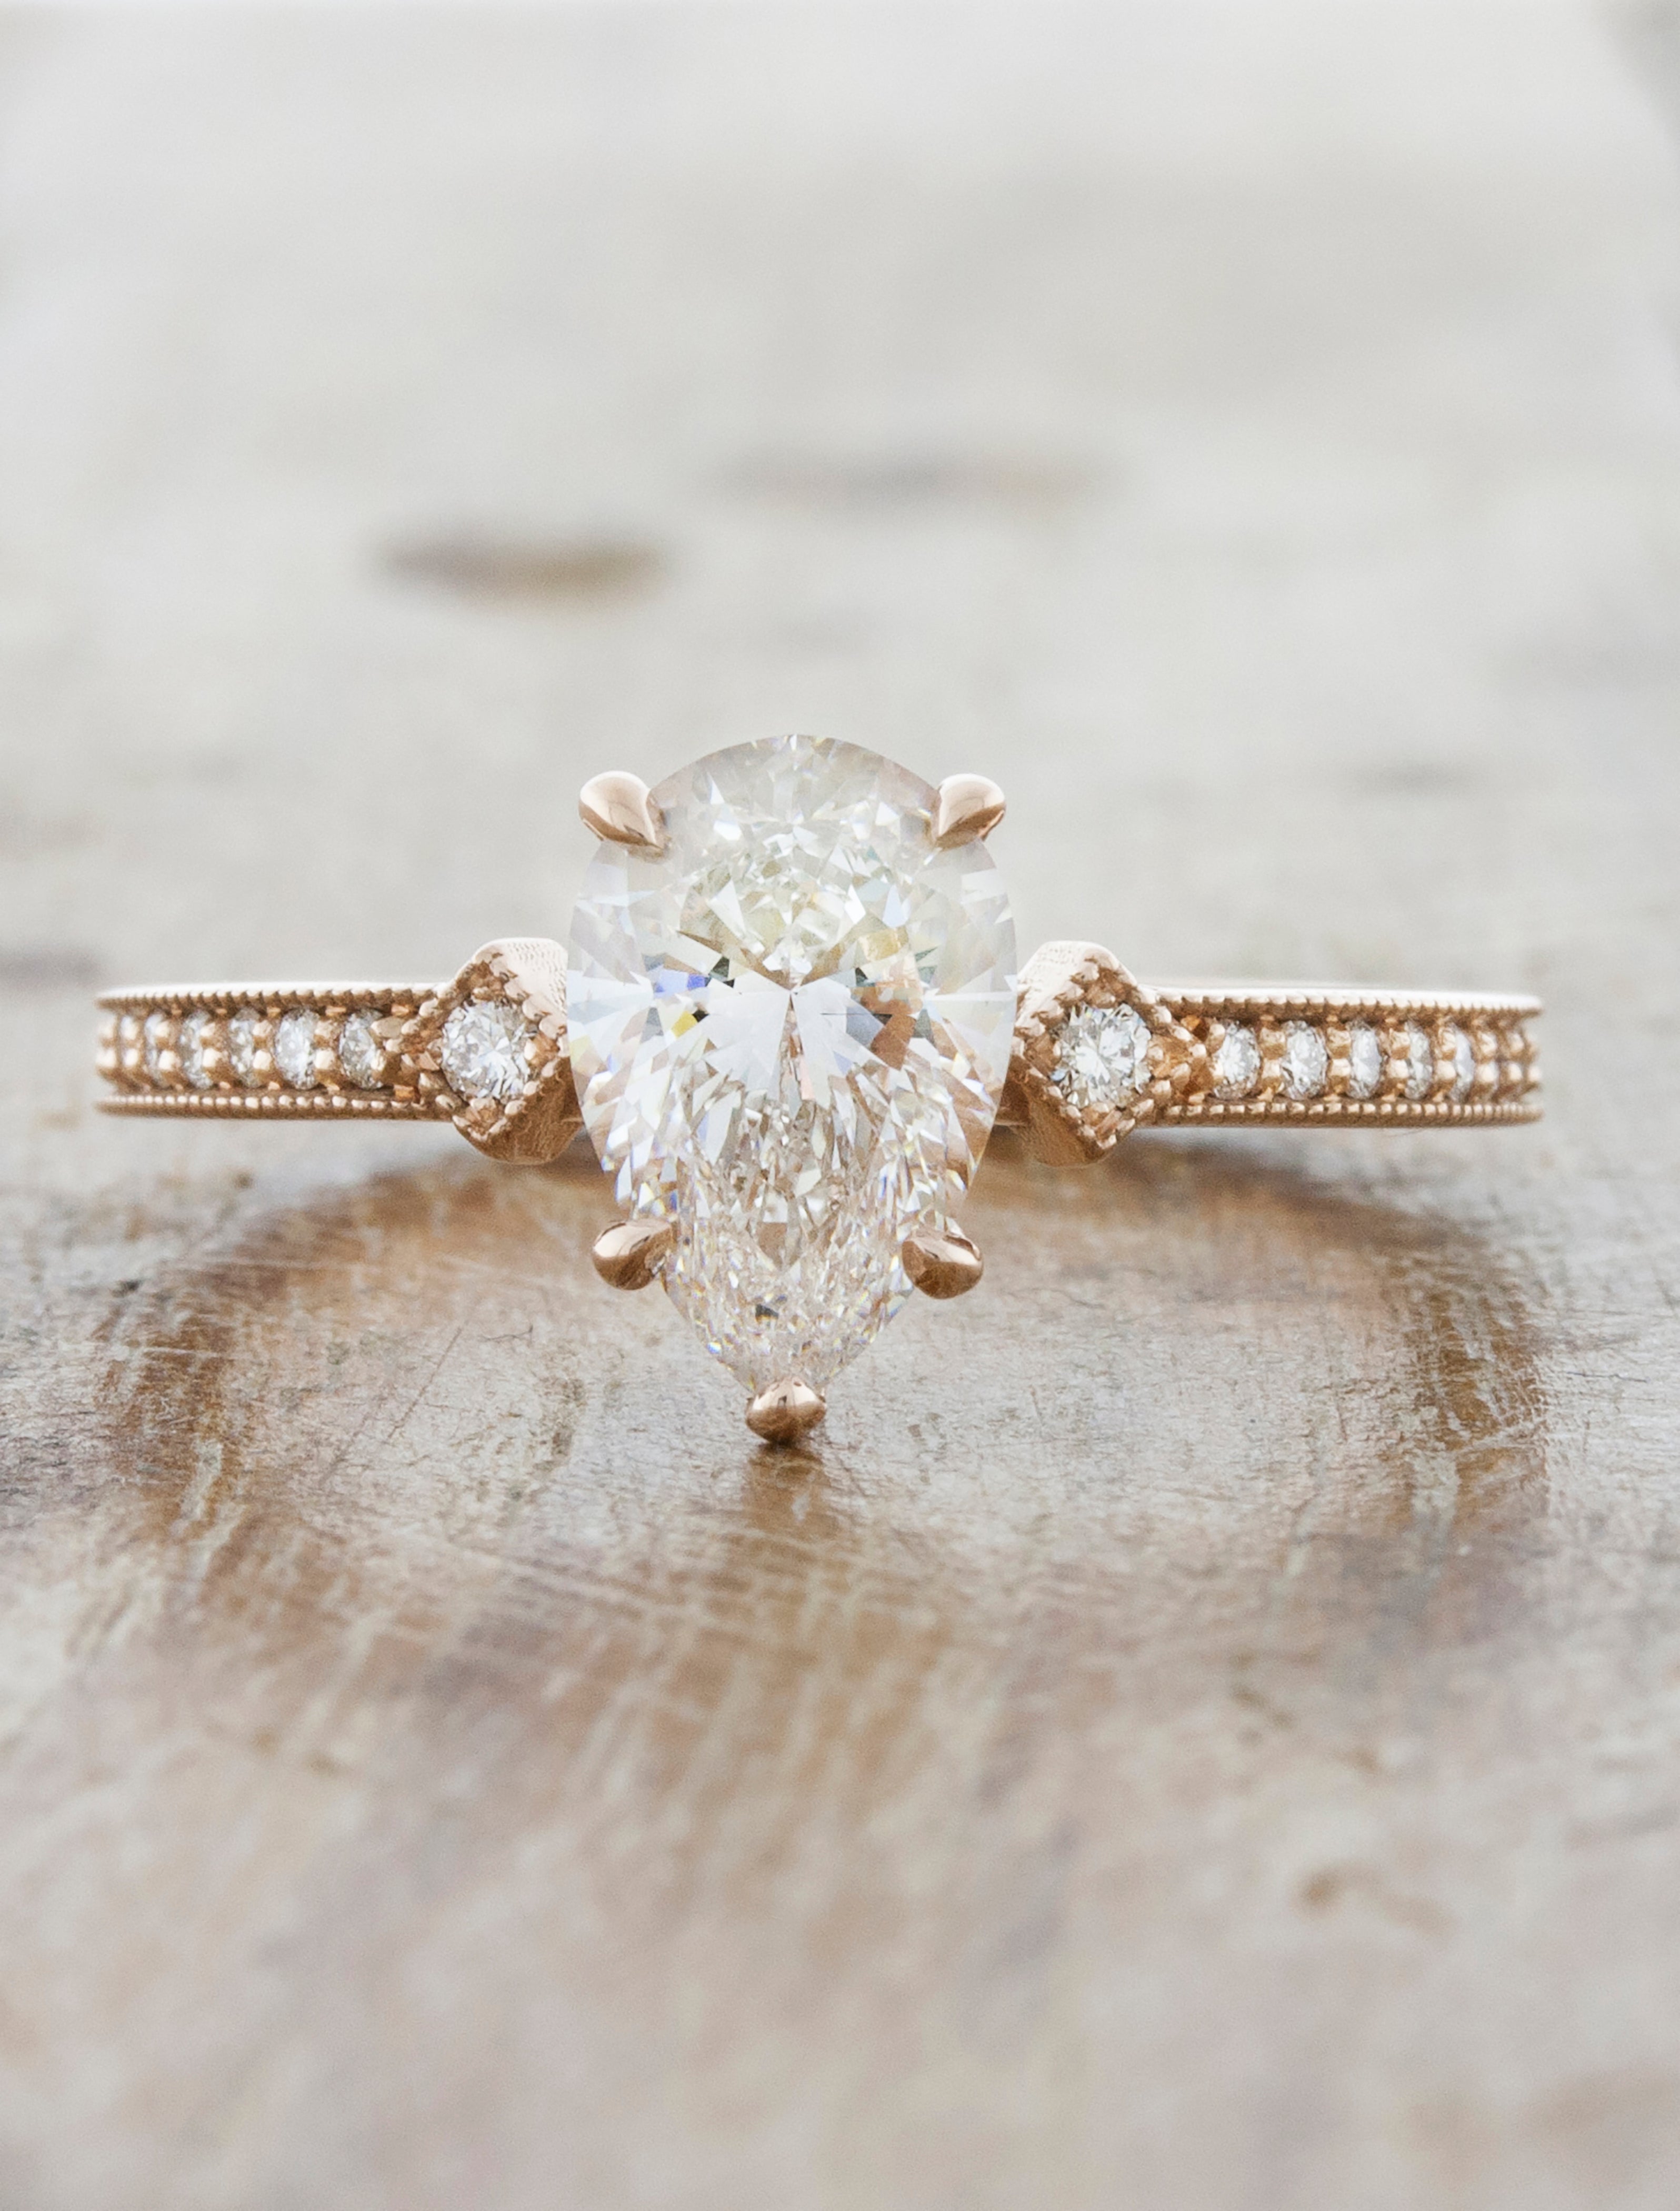 3.5 Ctw Solitaire Pear-Cut Engagement Ring in 18K Gold